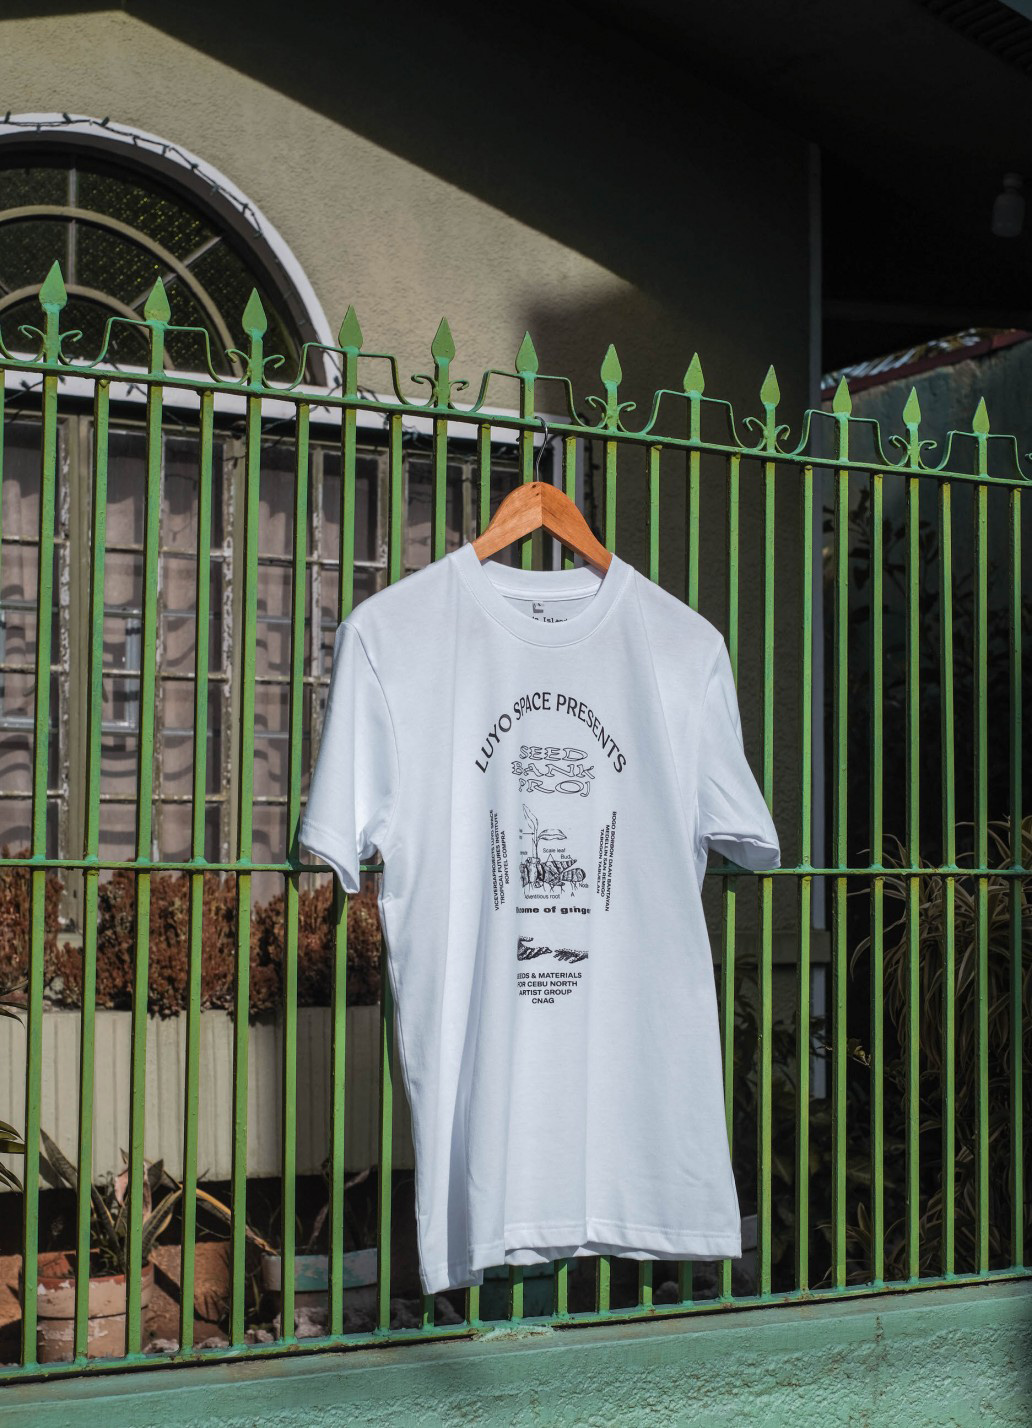 A t-shirt hangs on green metal gates that surround what looks like a residential space.